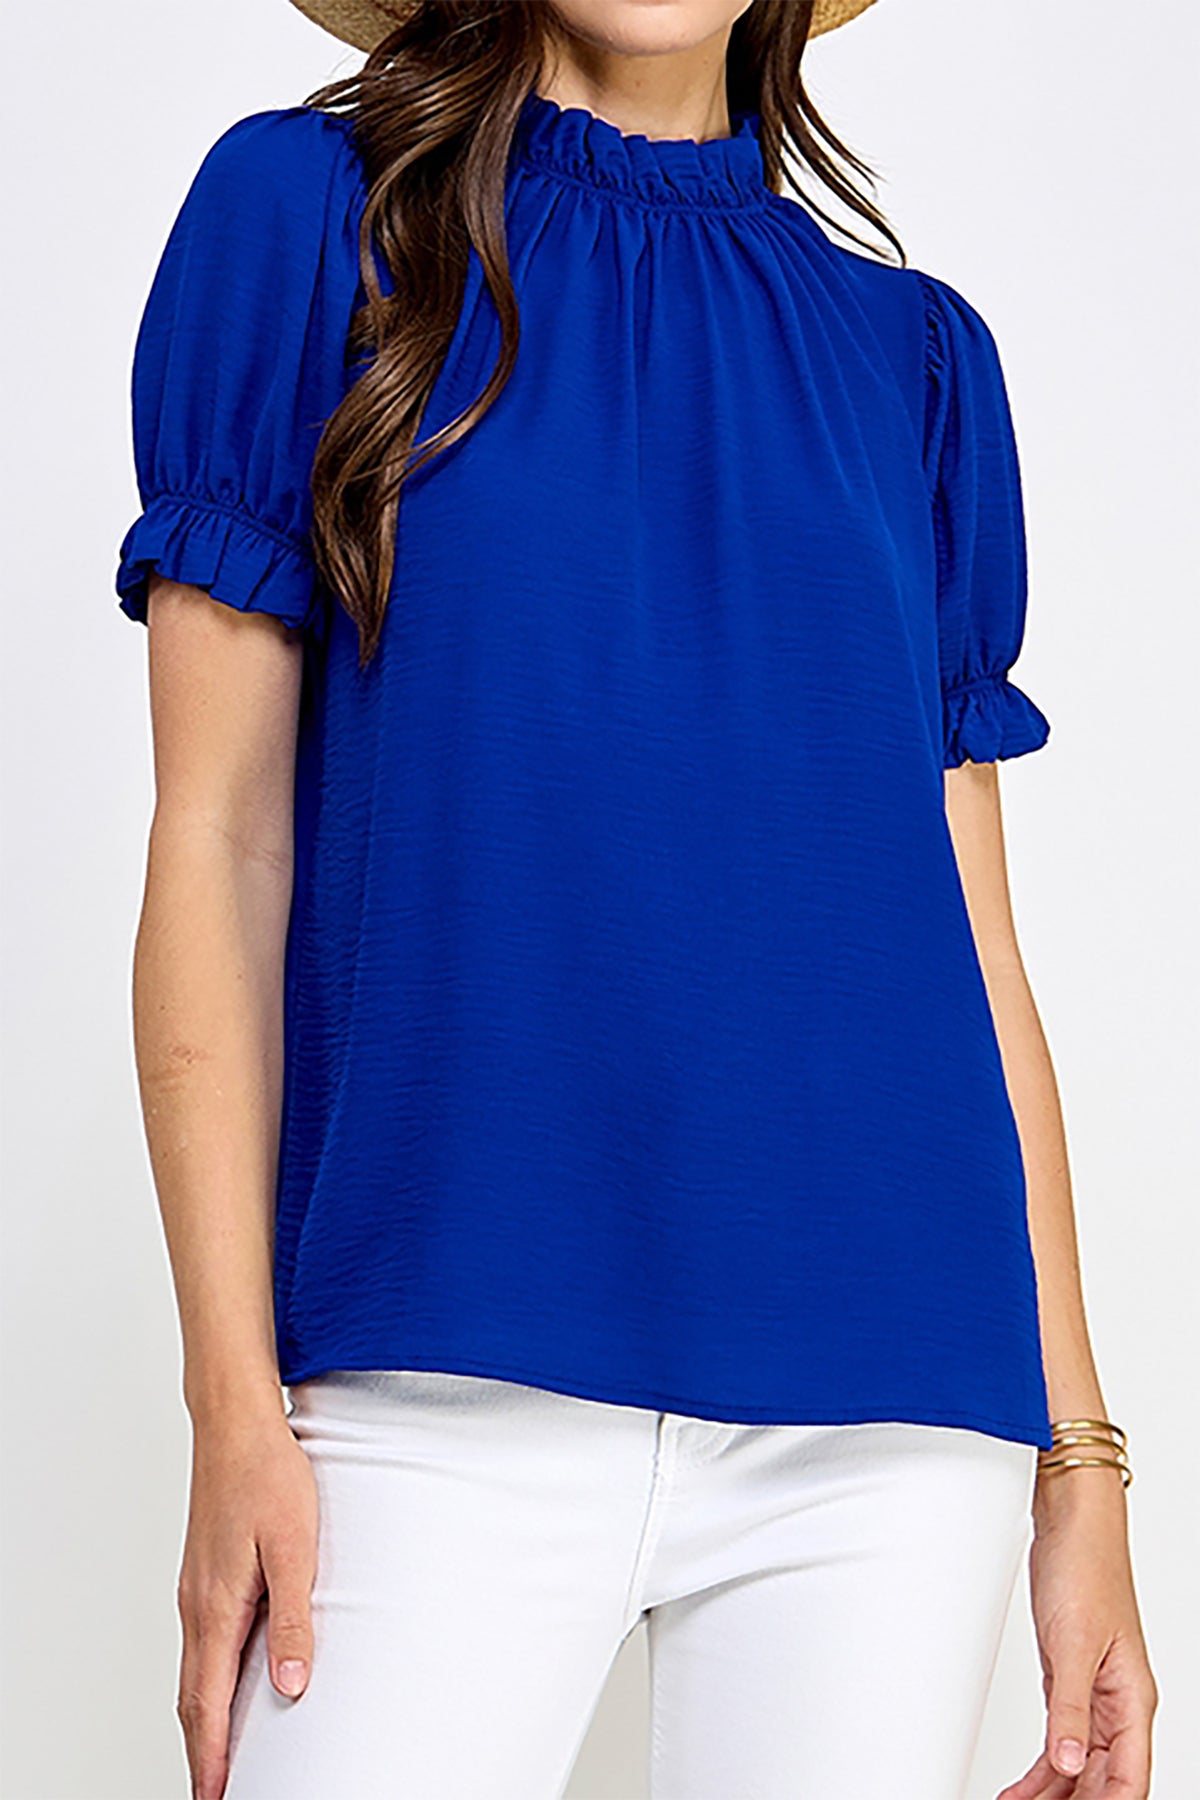 MOCK NECK PUFF SLEEVE WOVEN SOLID BLOUSE 2-2-2-2